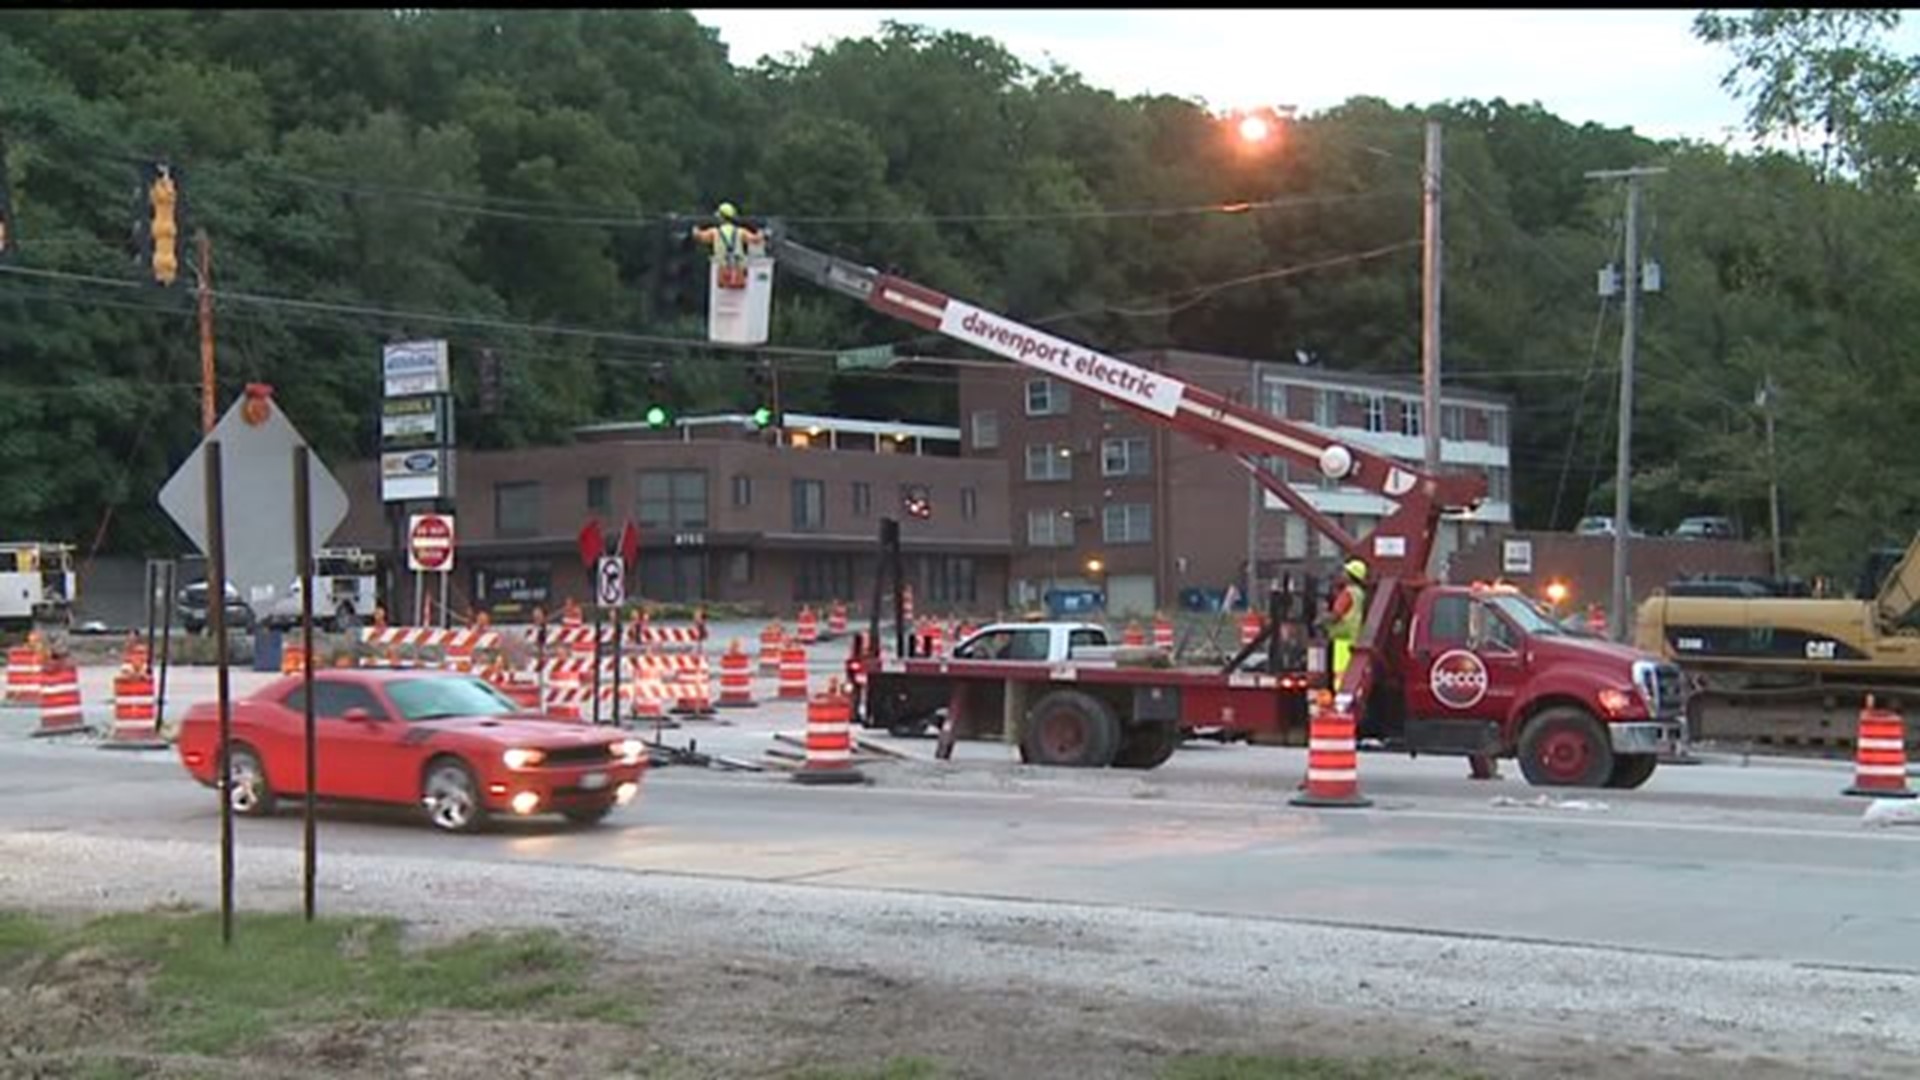 Construction Over For Now on Moline`s 41st Street